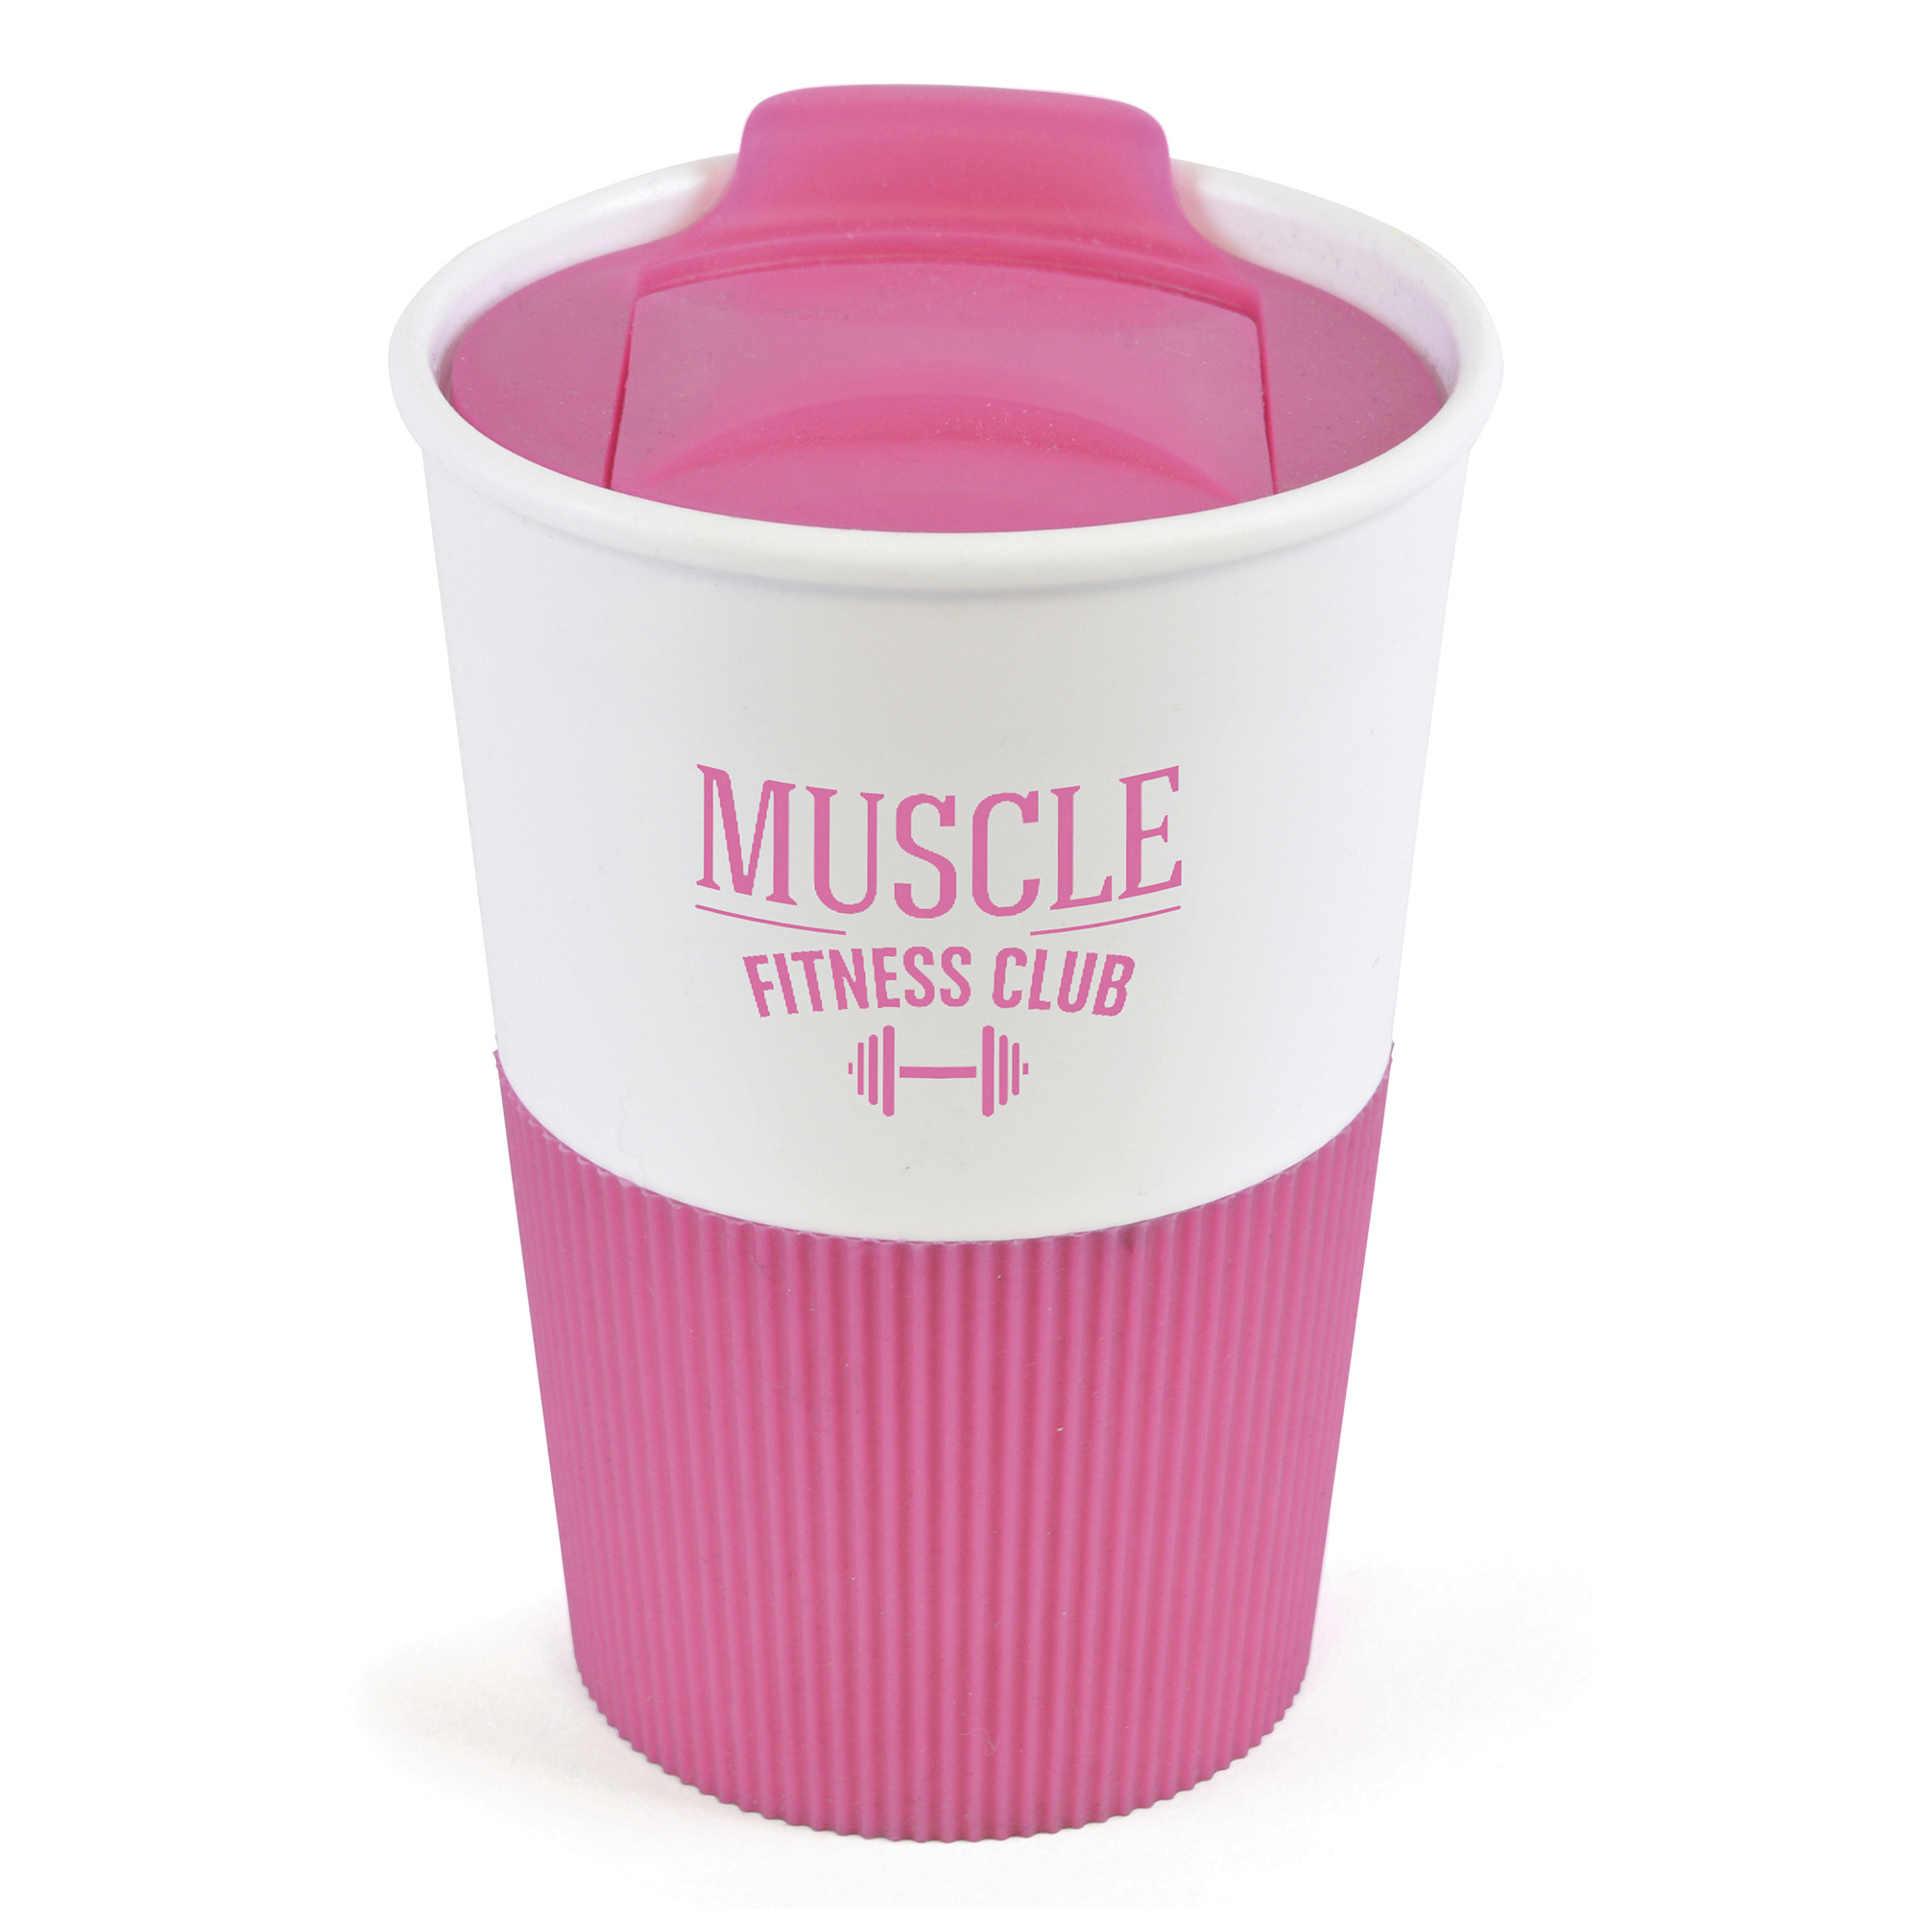 350ml reusable hot drinks mug for promotional merchandise in pink and white